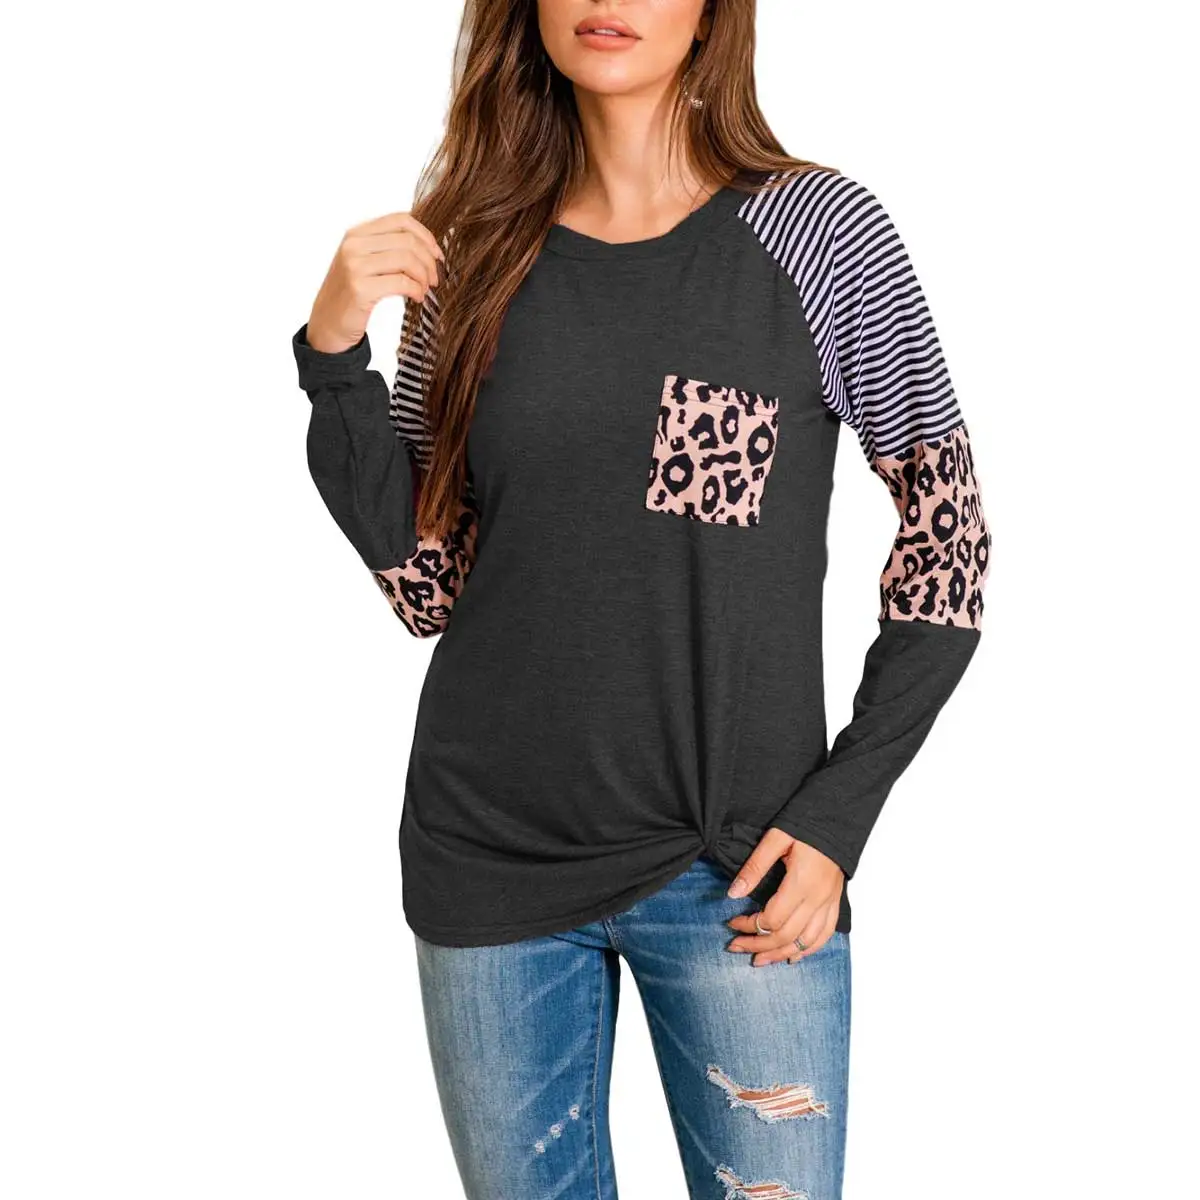 

Womens Autumn Wear, Fashionable Stripes Leopard O-Neck Long-Sleeves T-Shirt with Knotted Hem for Ladies, 5 Colors